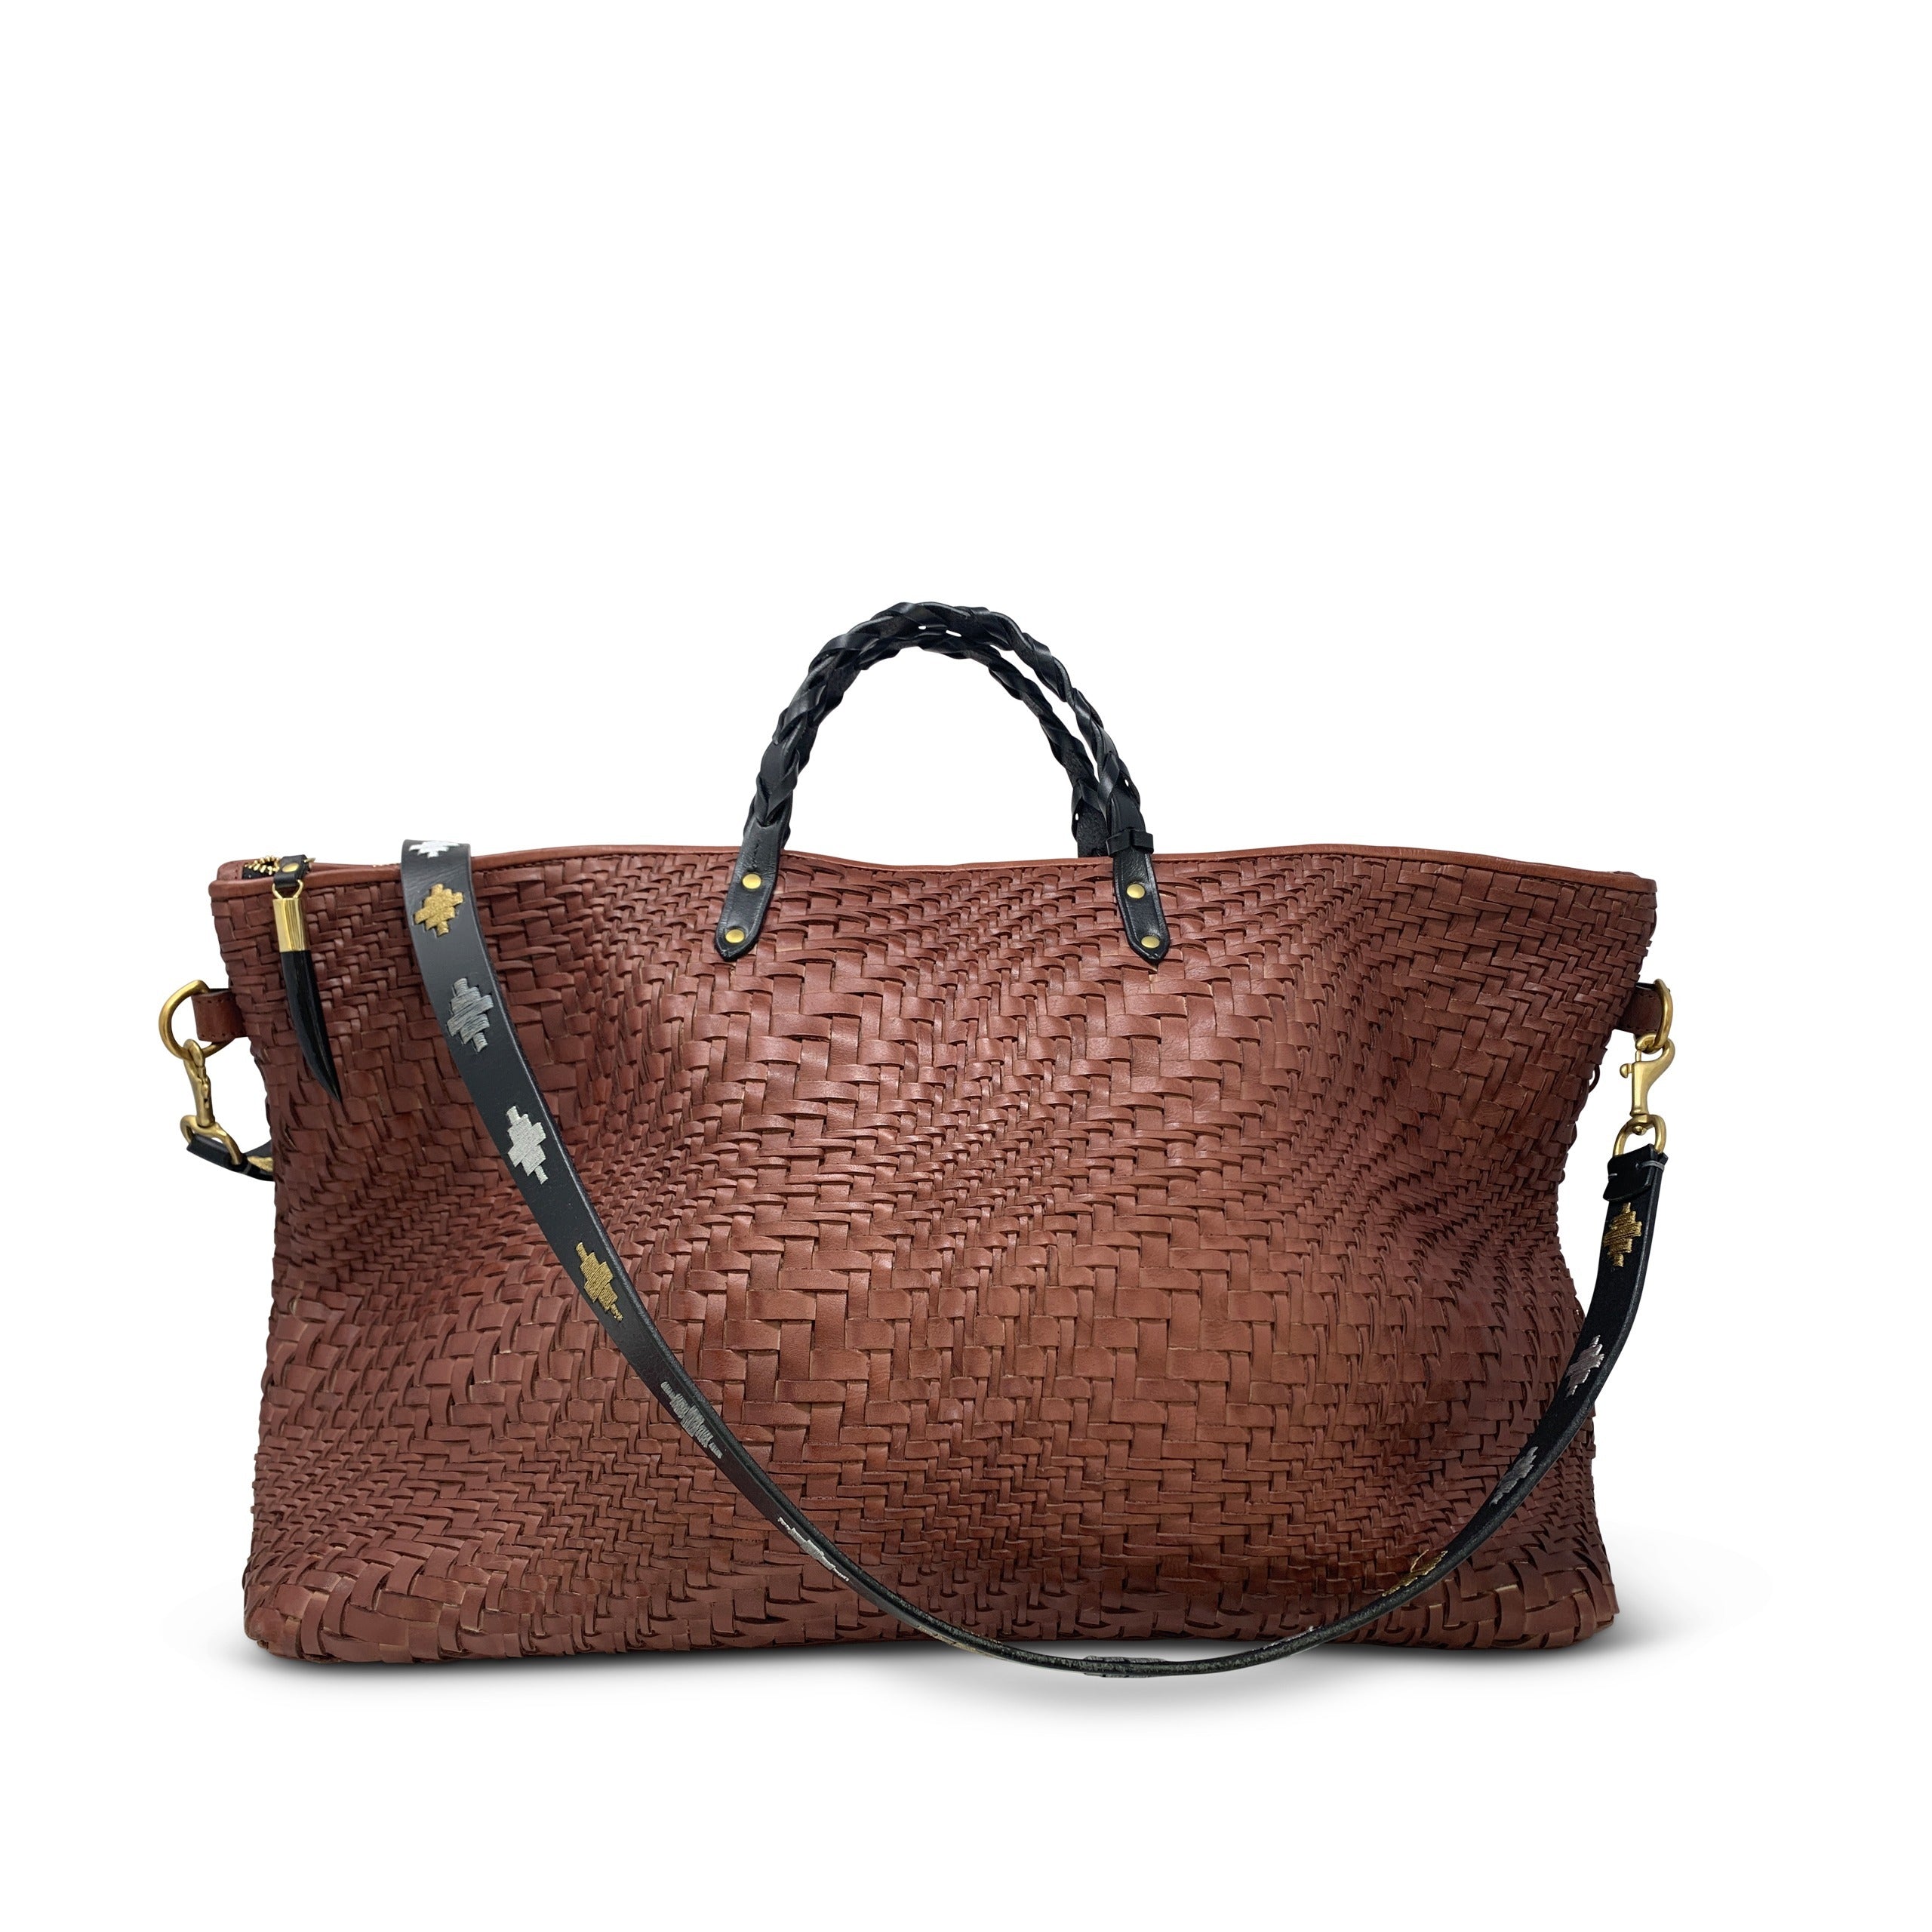 WOODLEIGH HOLDALL COCOA WEAVE – Kempton & Co.